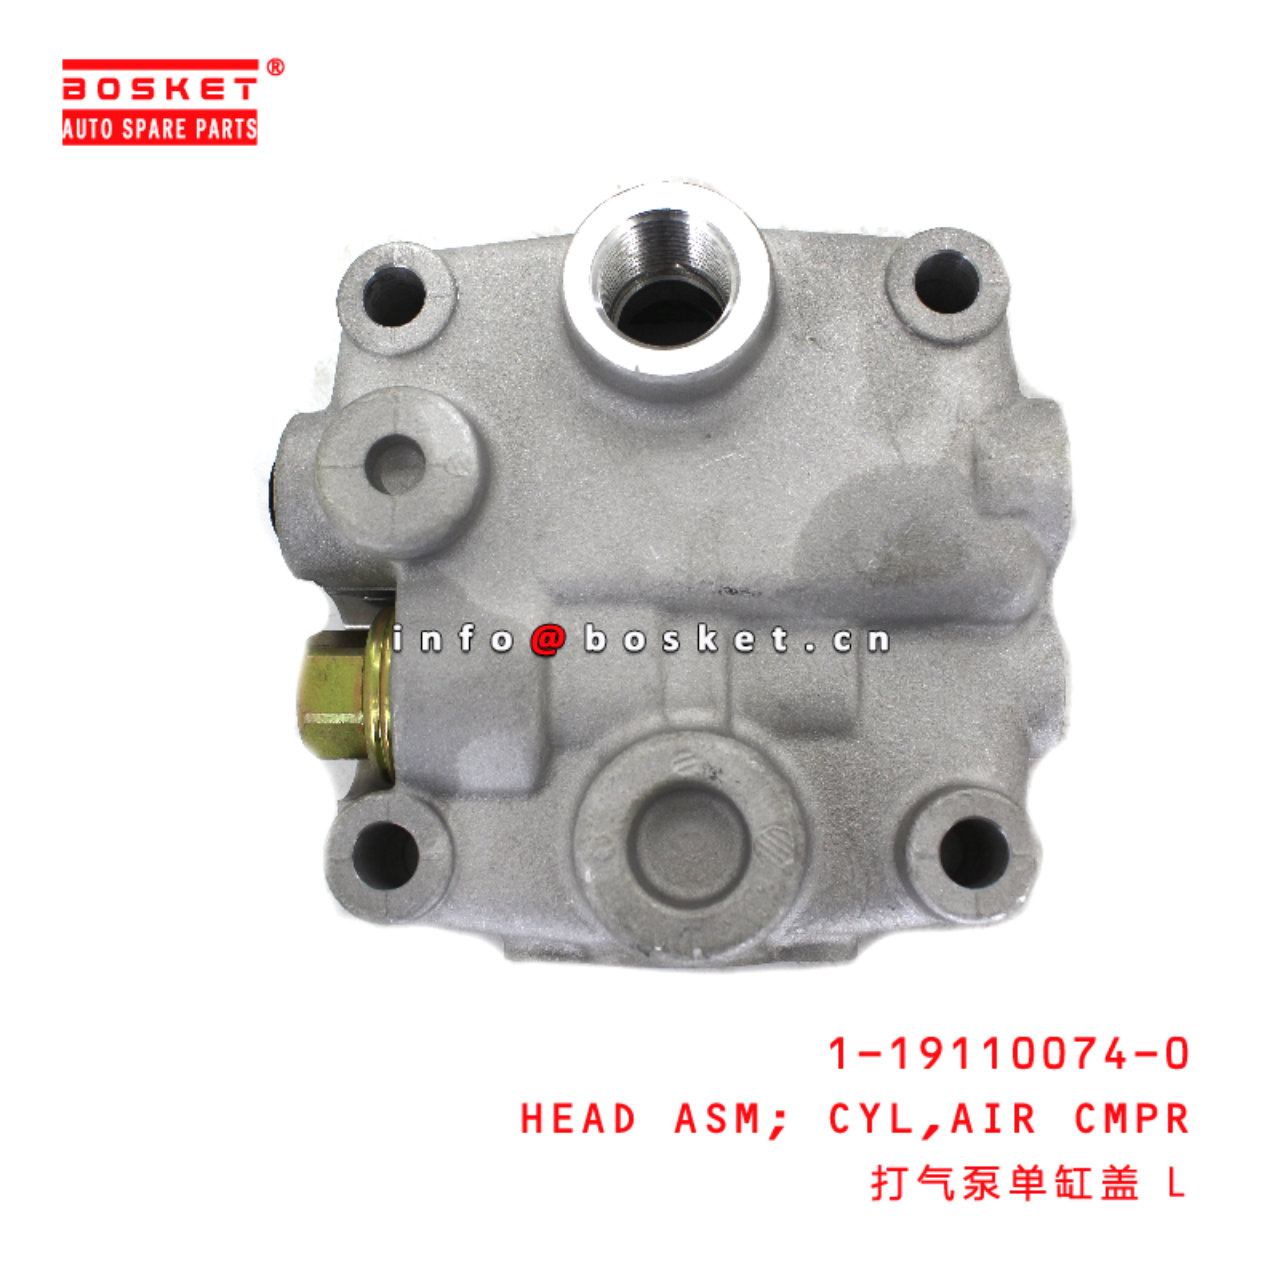 1-19110074-0 Air Compressor Cylinder Head Assembly...